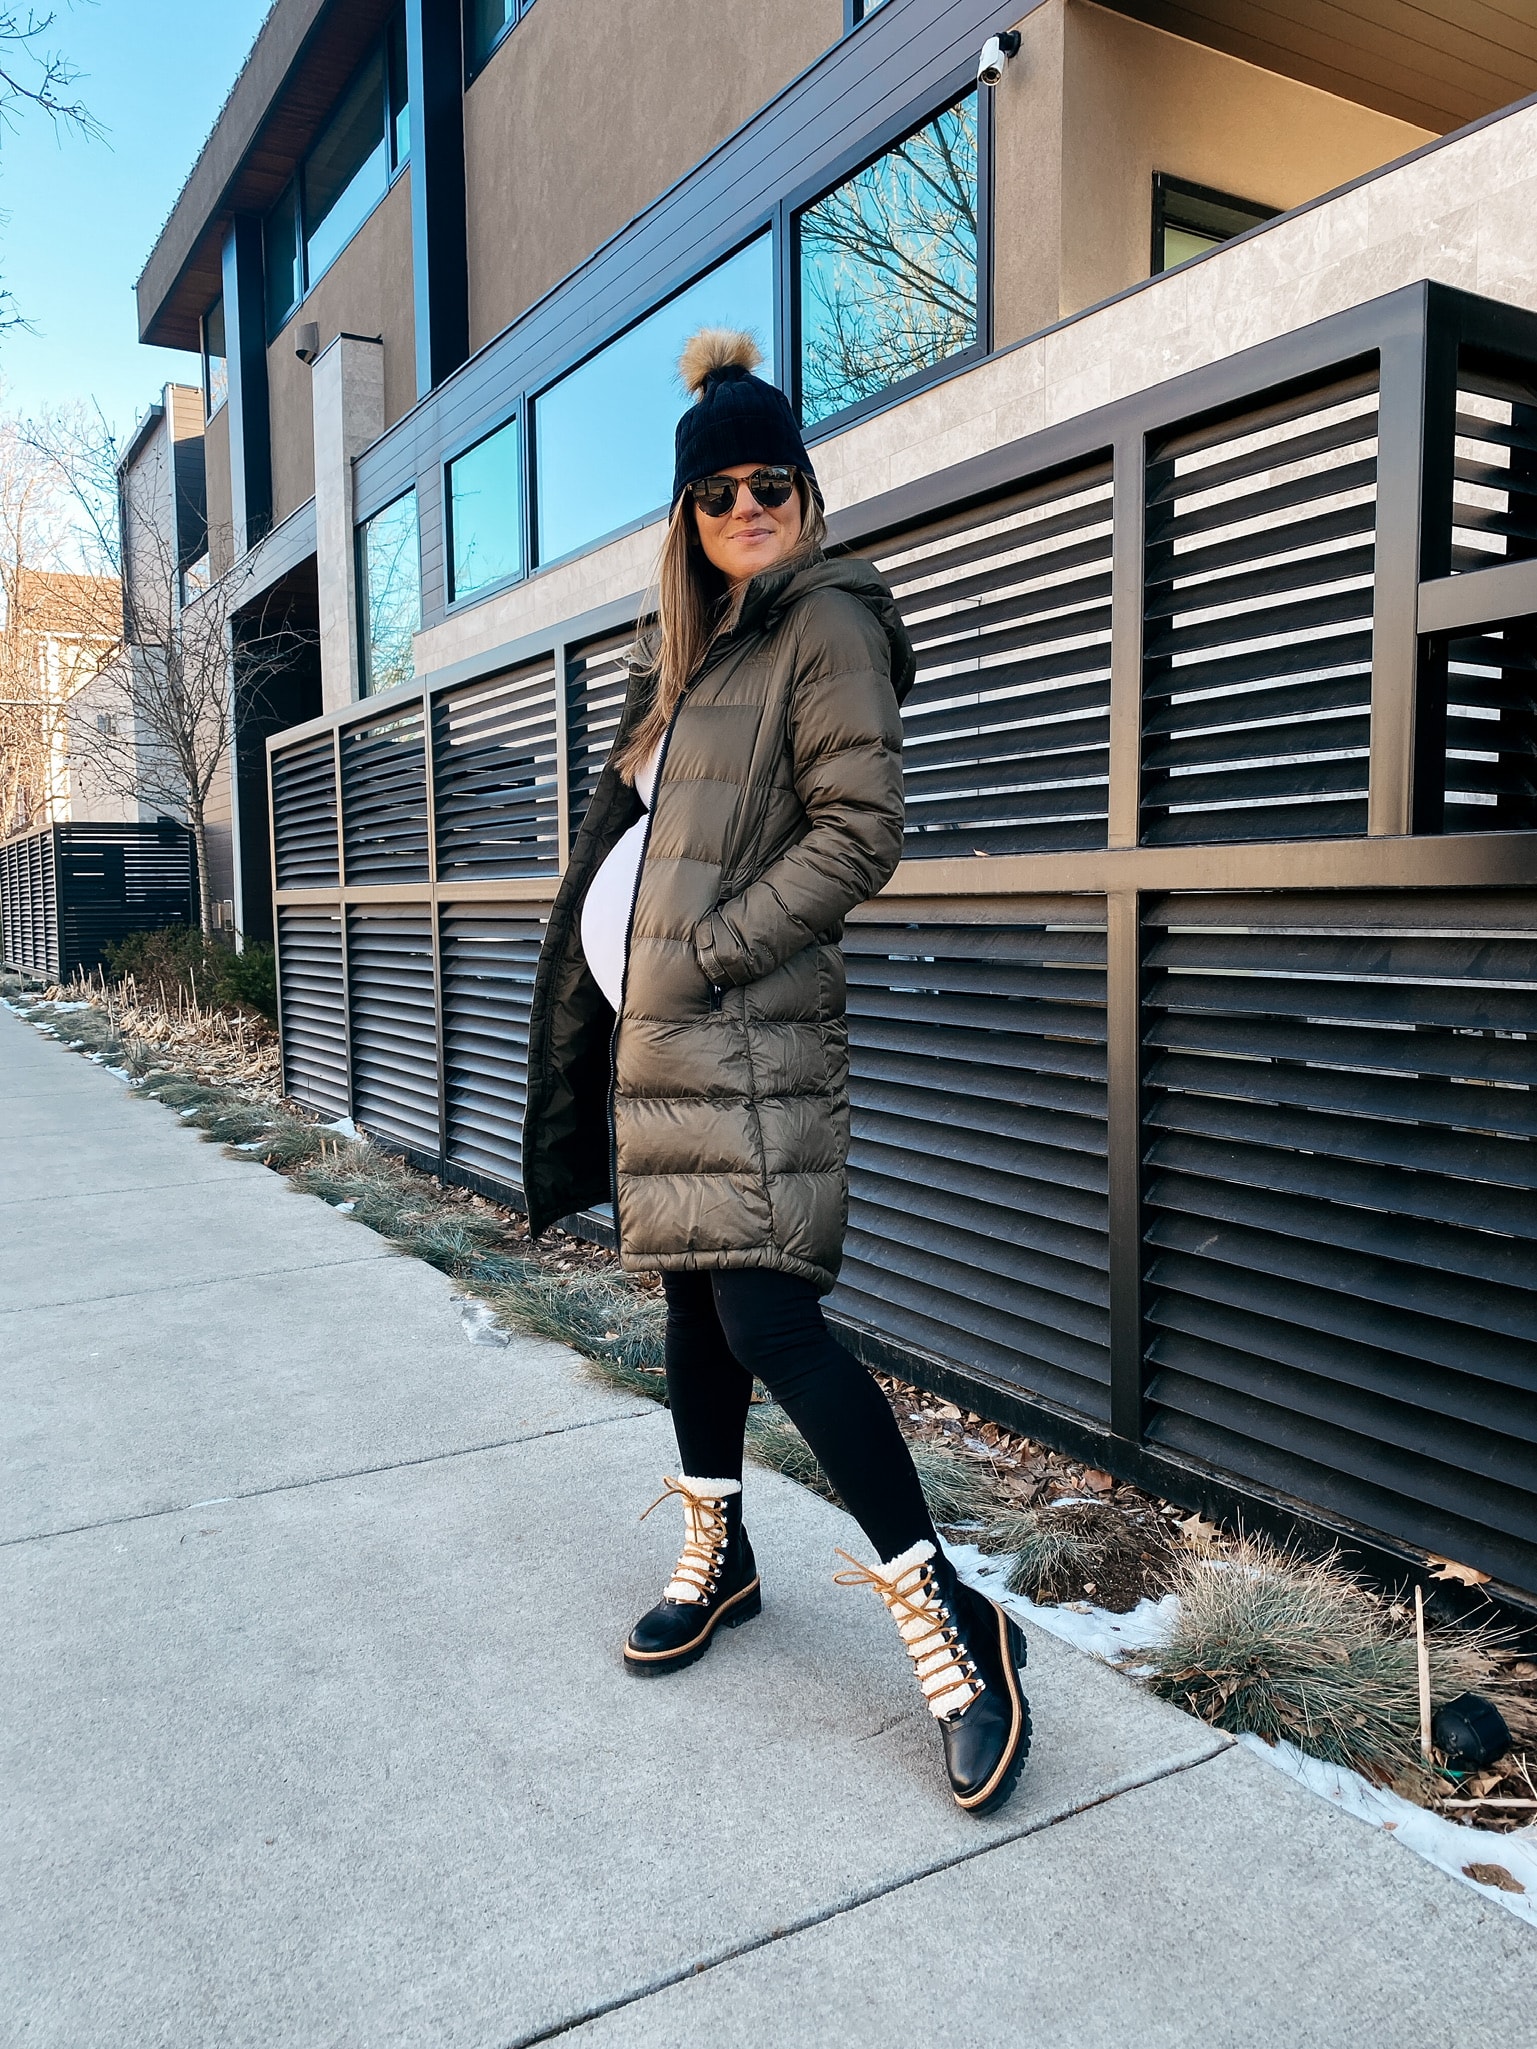 Brighton Butler wearing north face jacket, mar fisher boots, maternity leggings and amazon white shirt